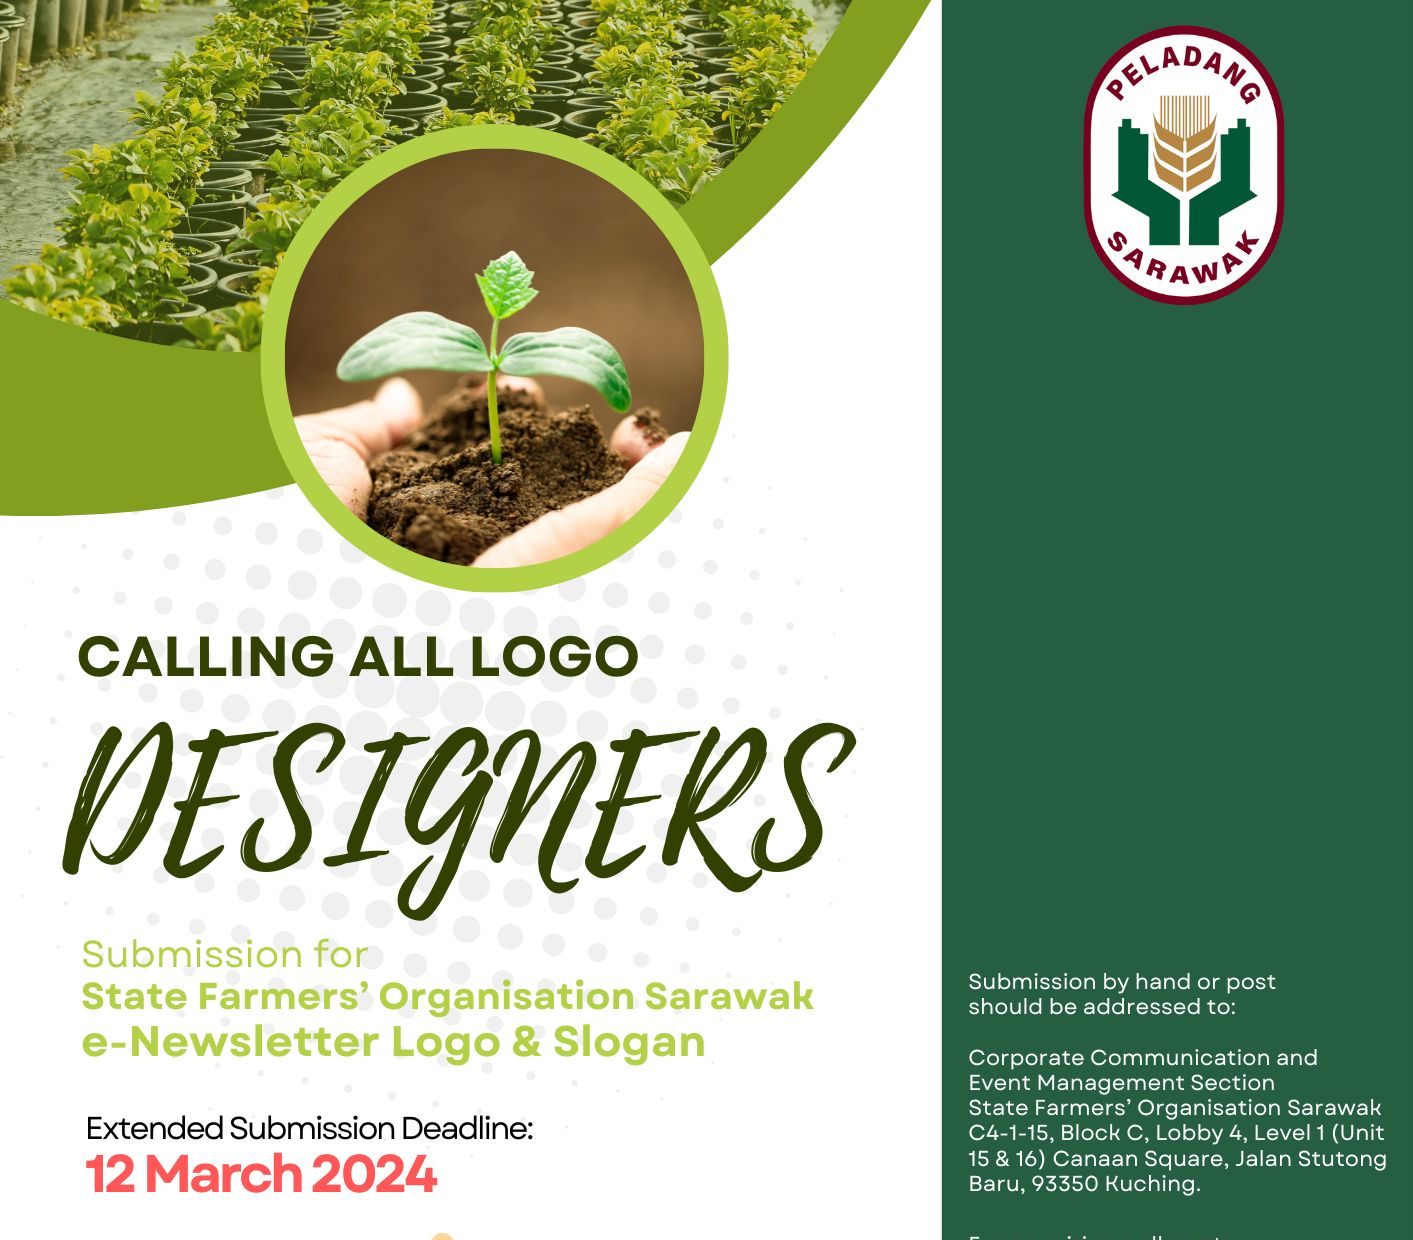 CALLING ALL LOGO DESIGNERS (EXTENDED SUBMISSION DEADLINE)